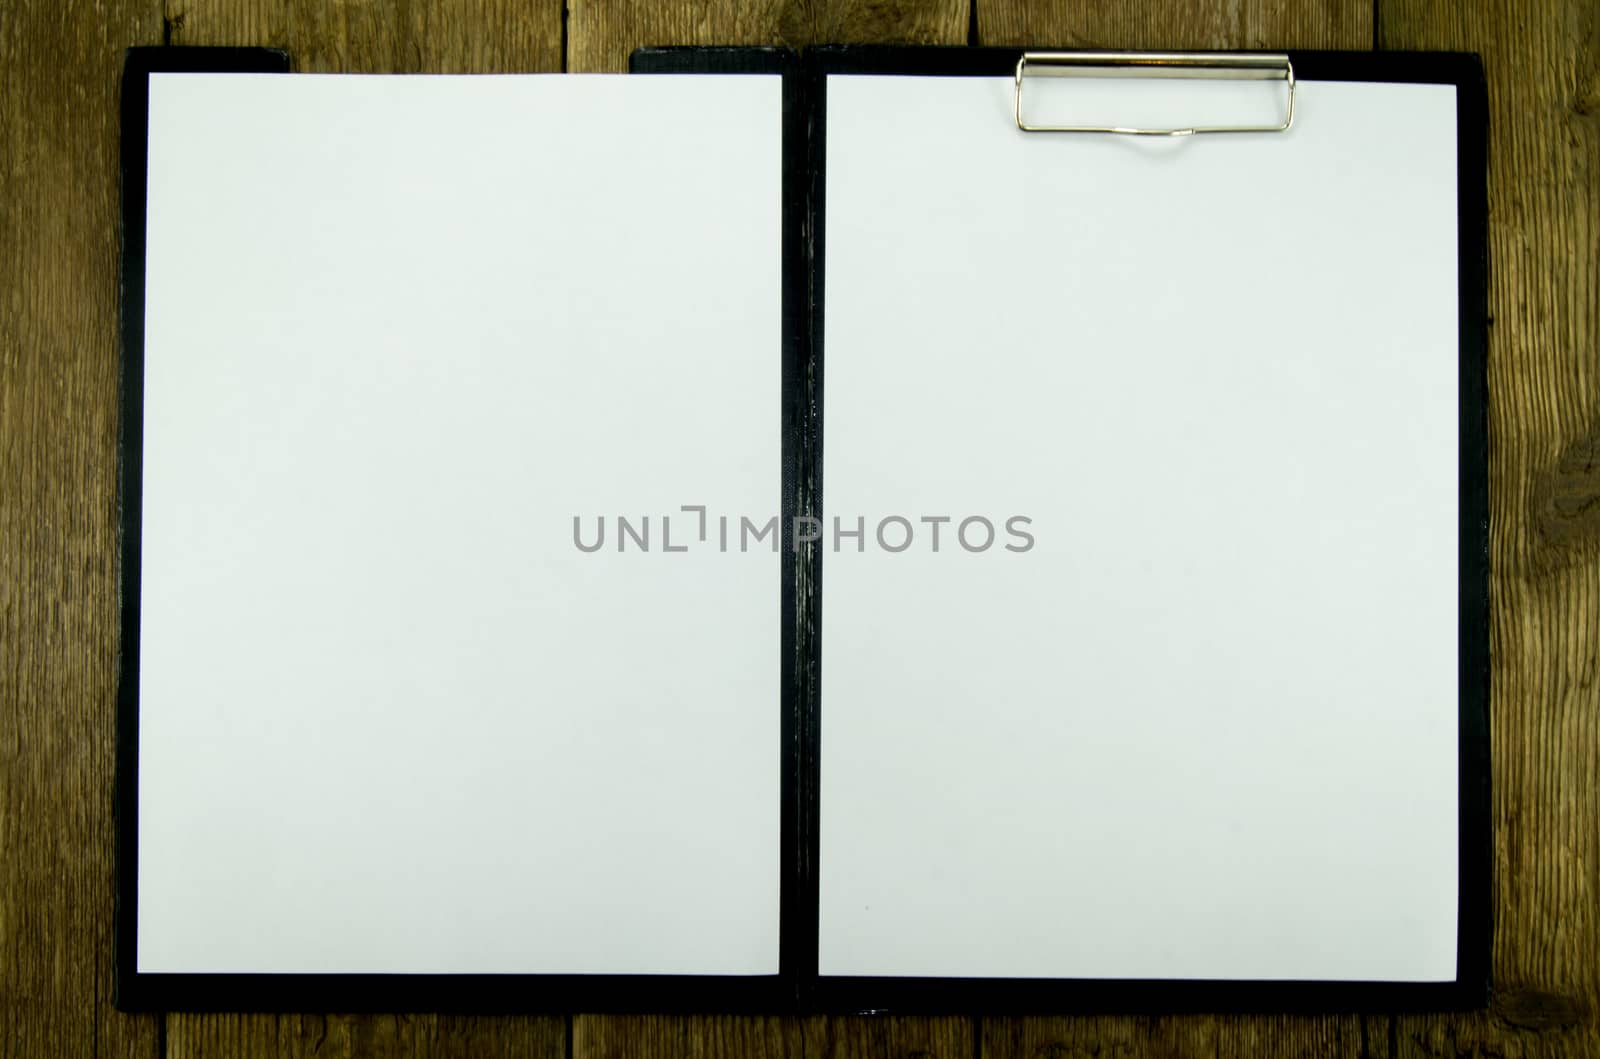 White paper on wood background. For your commercial and editorial use